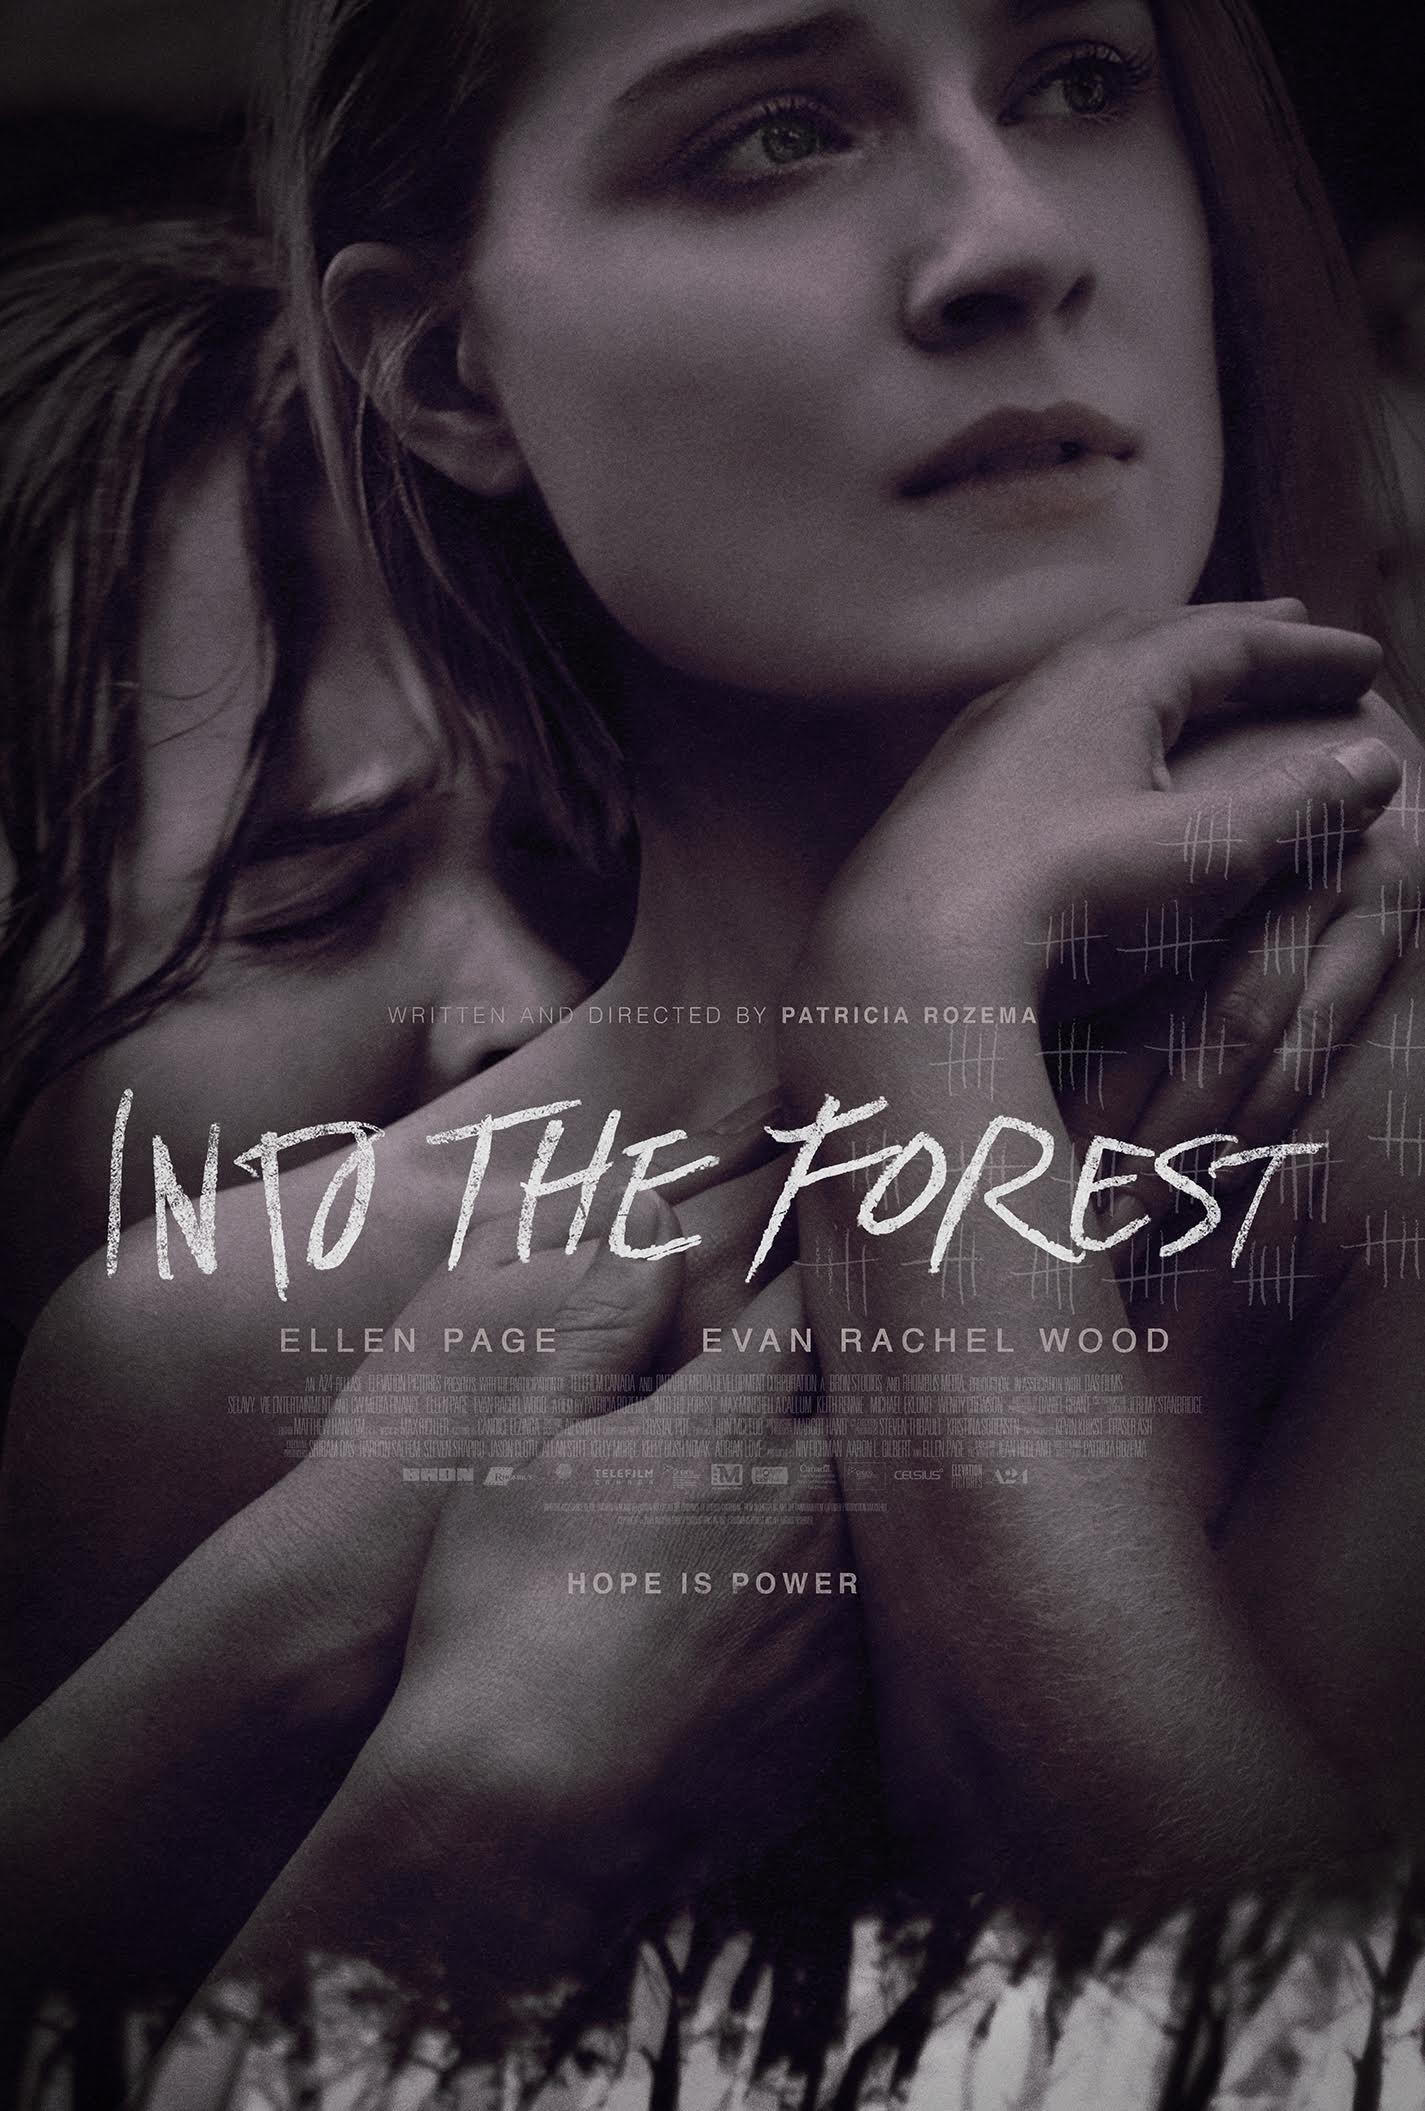 Forest Hollywood Sex Video - Into the Forest | Rotten Tomatoes